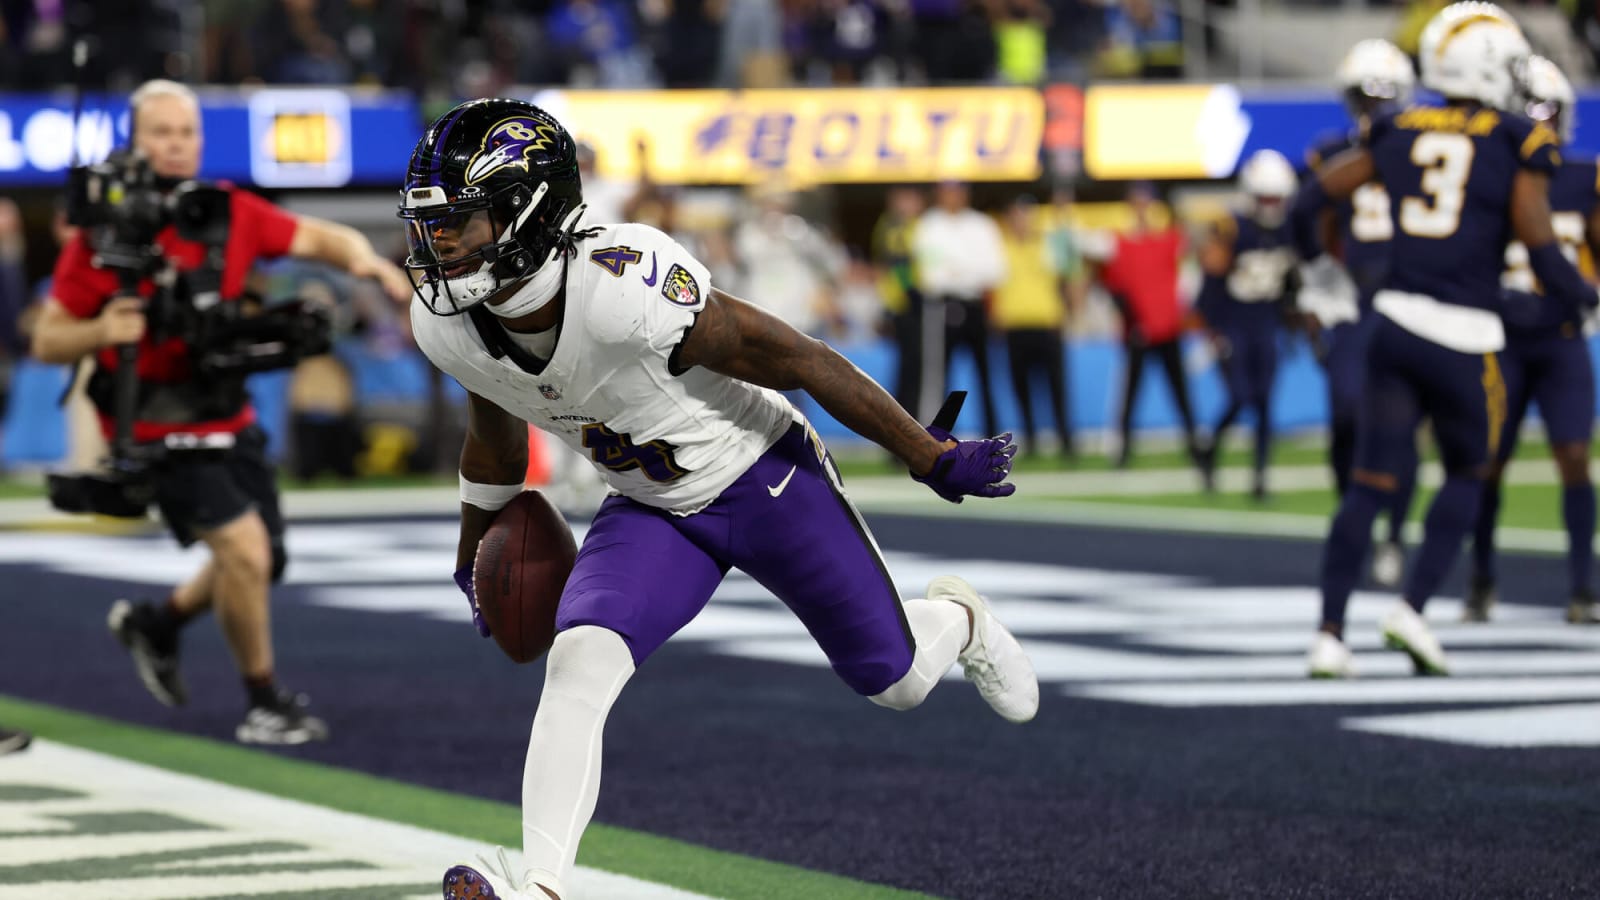 Late TD Secures Win For Ravens Over Chargers